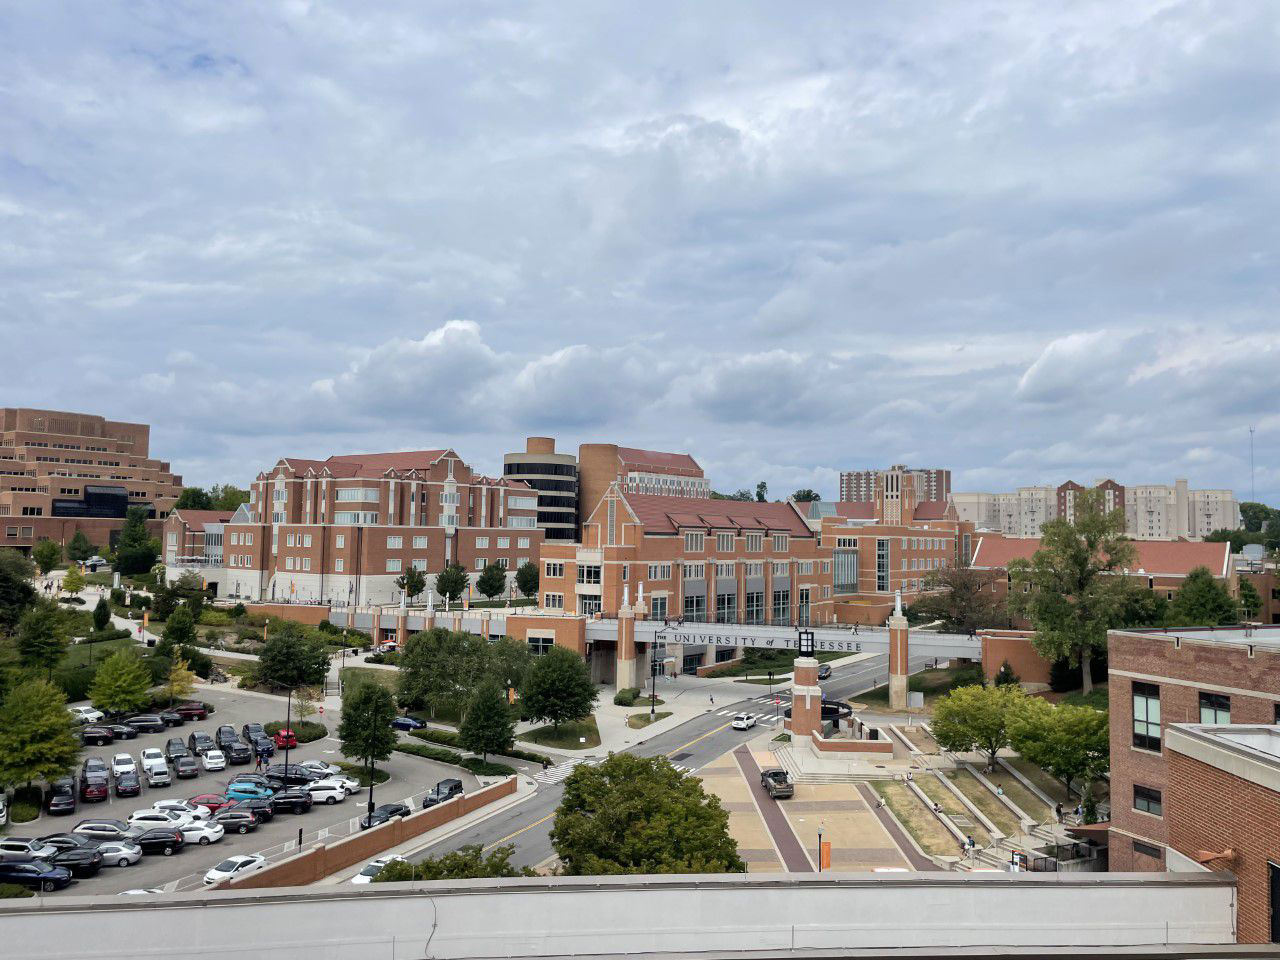 University of Tennessee tuition could be on the rise